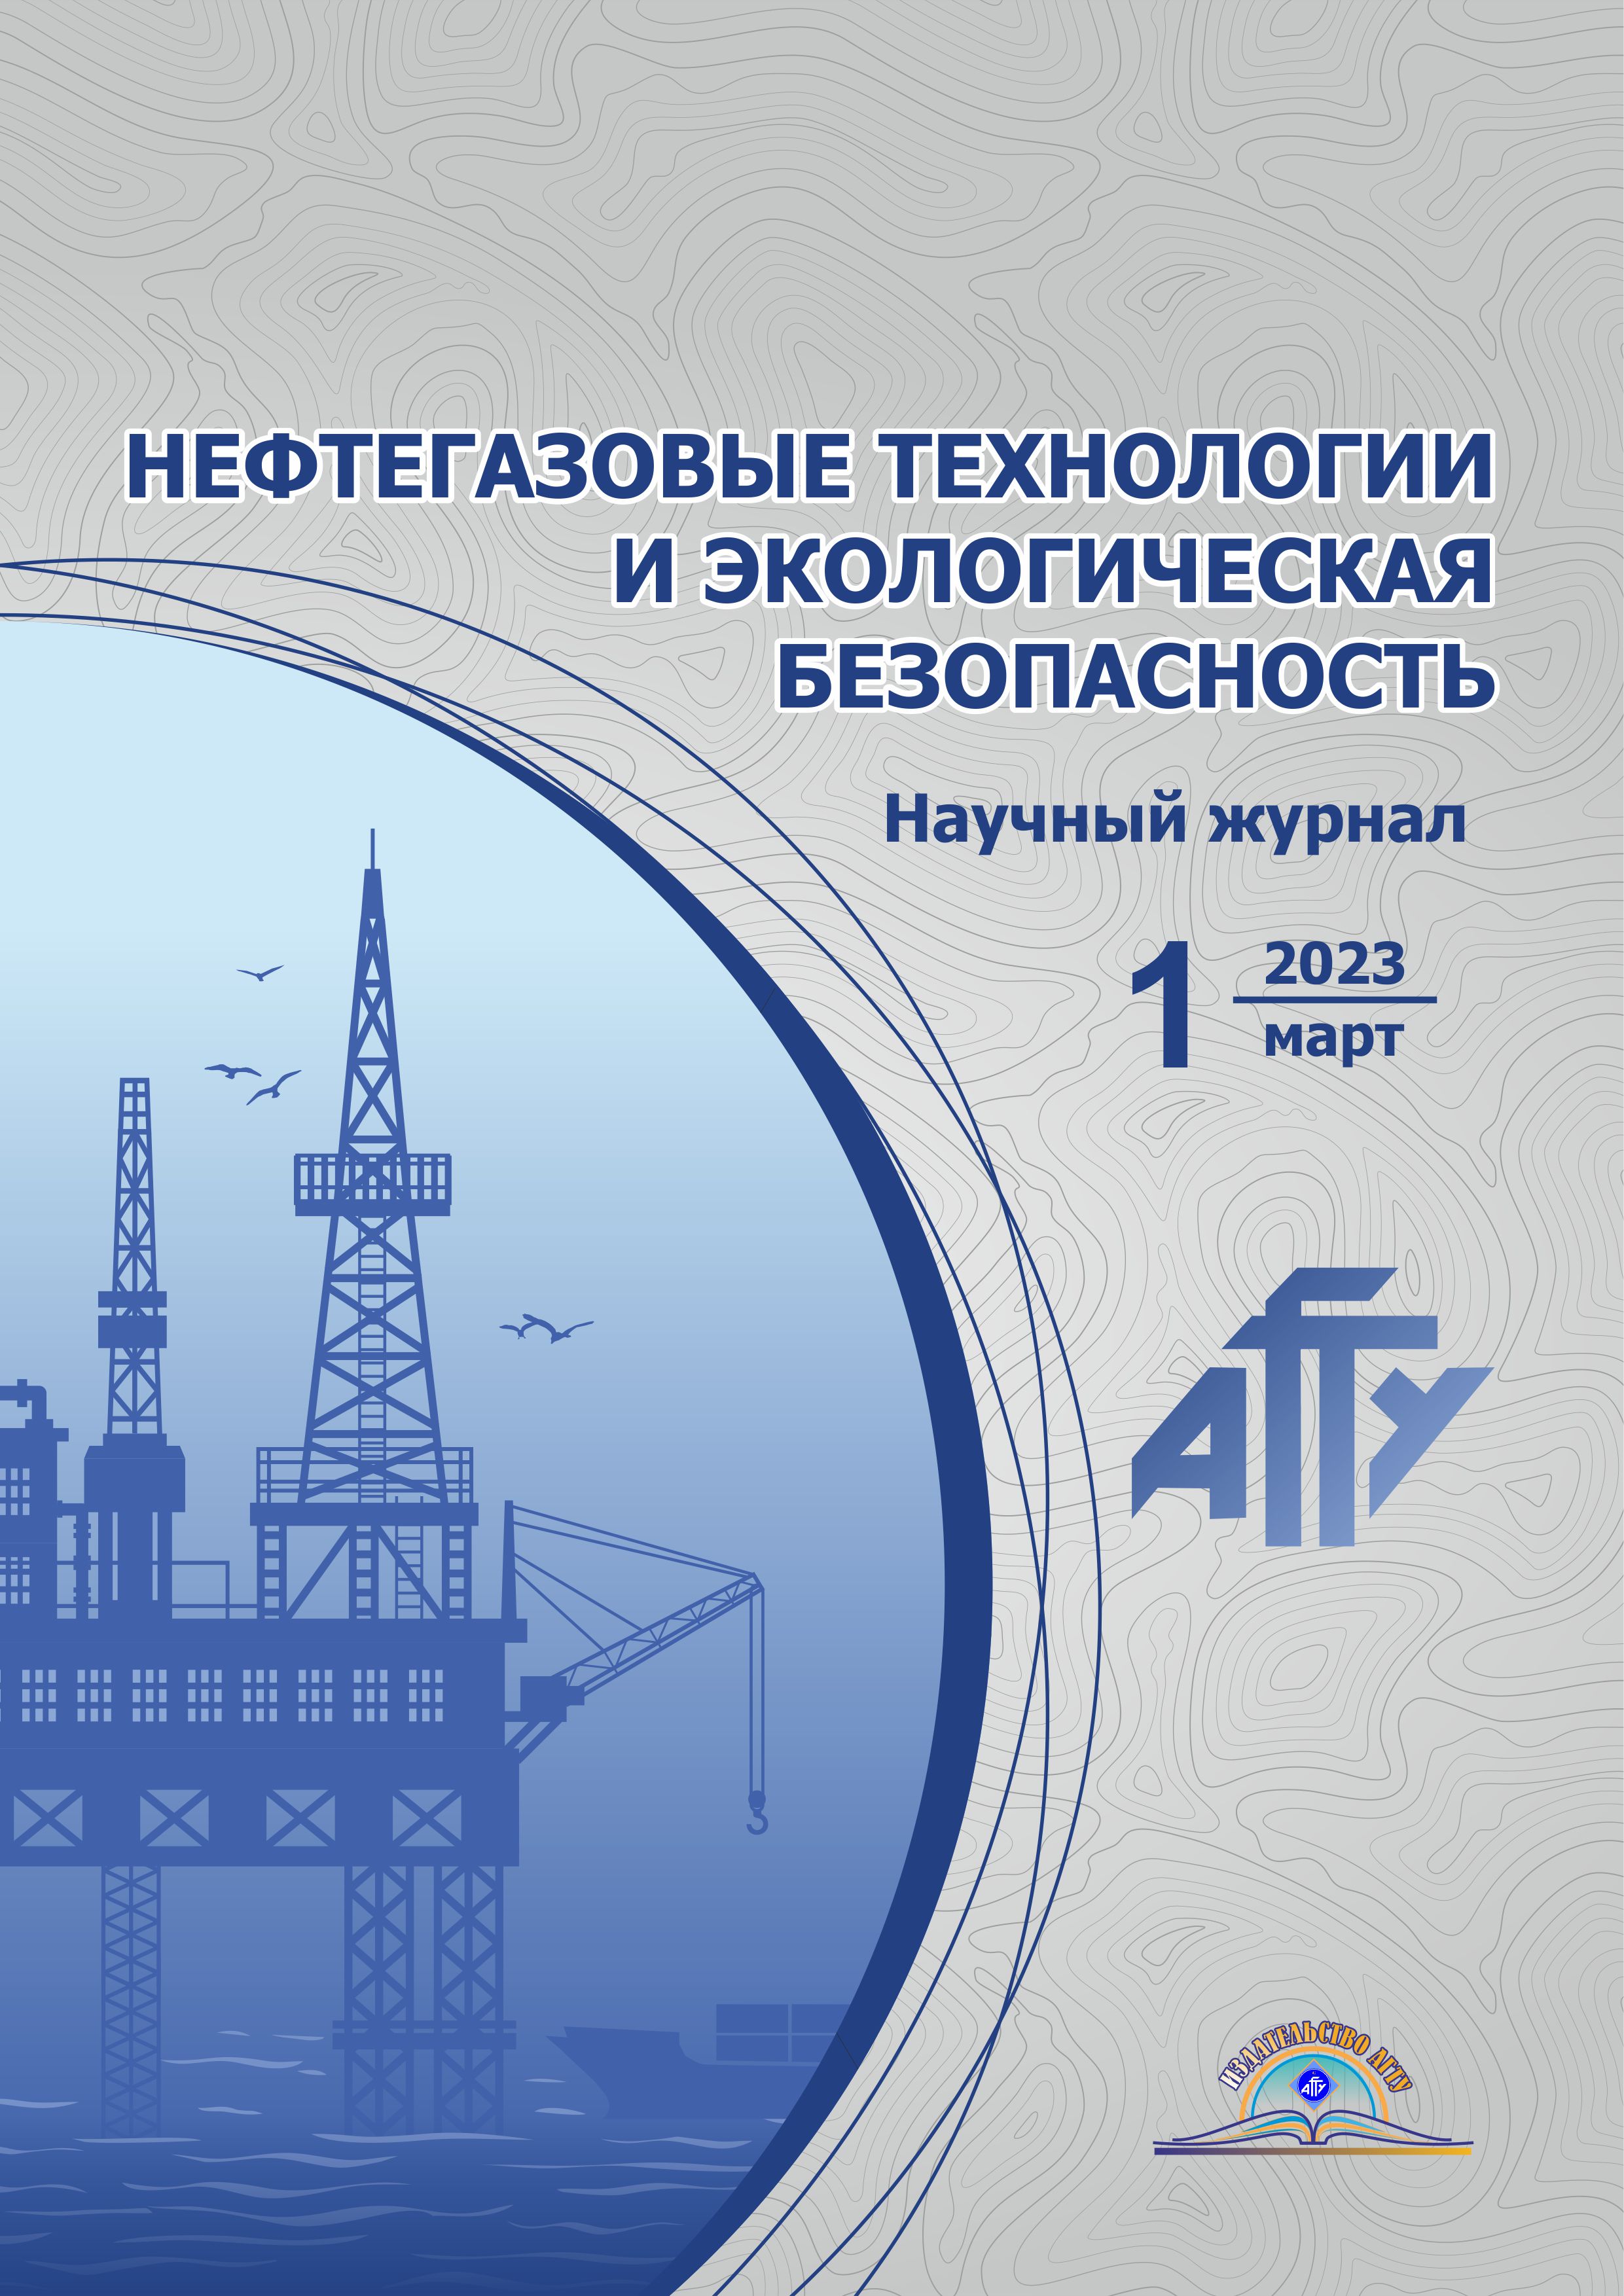                         Oil and gas technologies and environmental safety
            